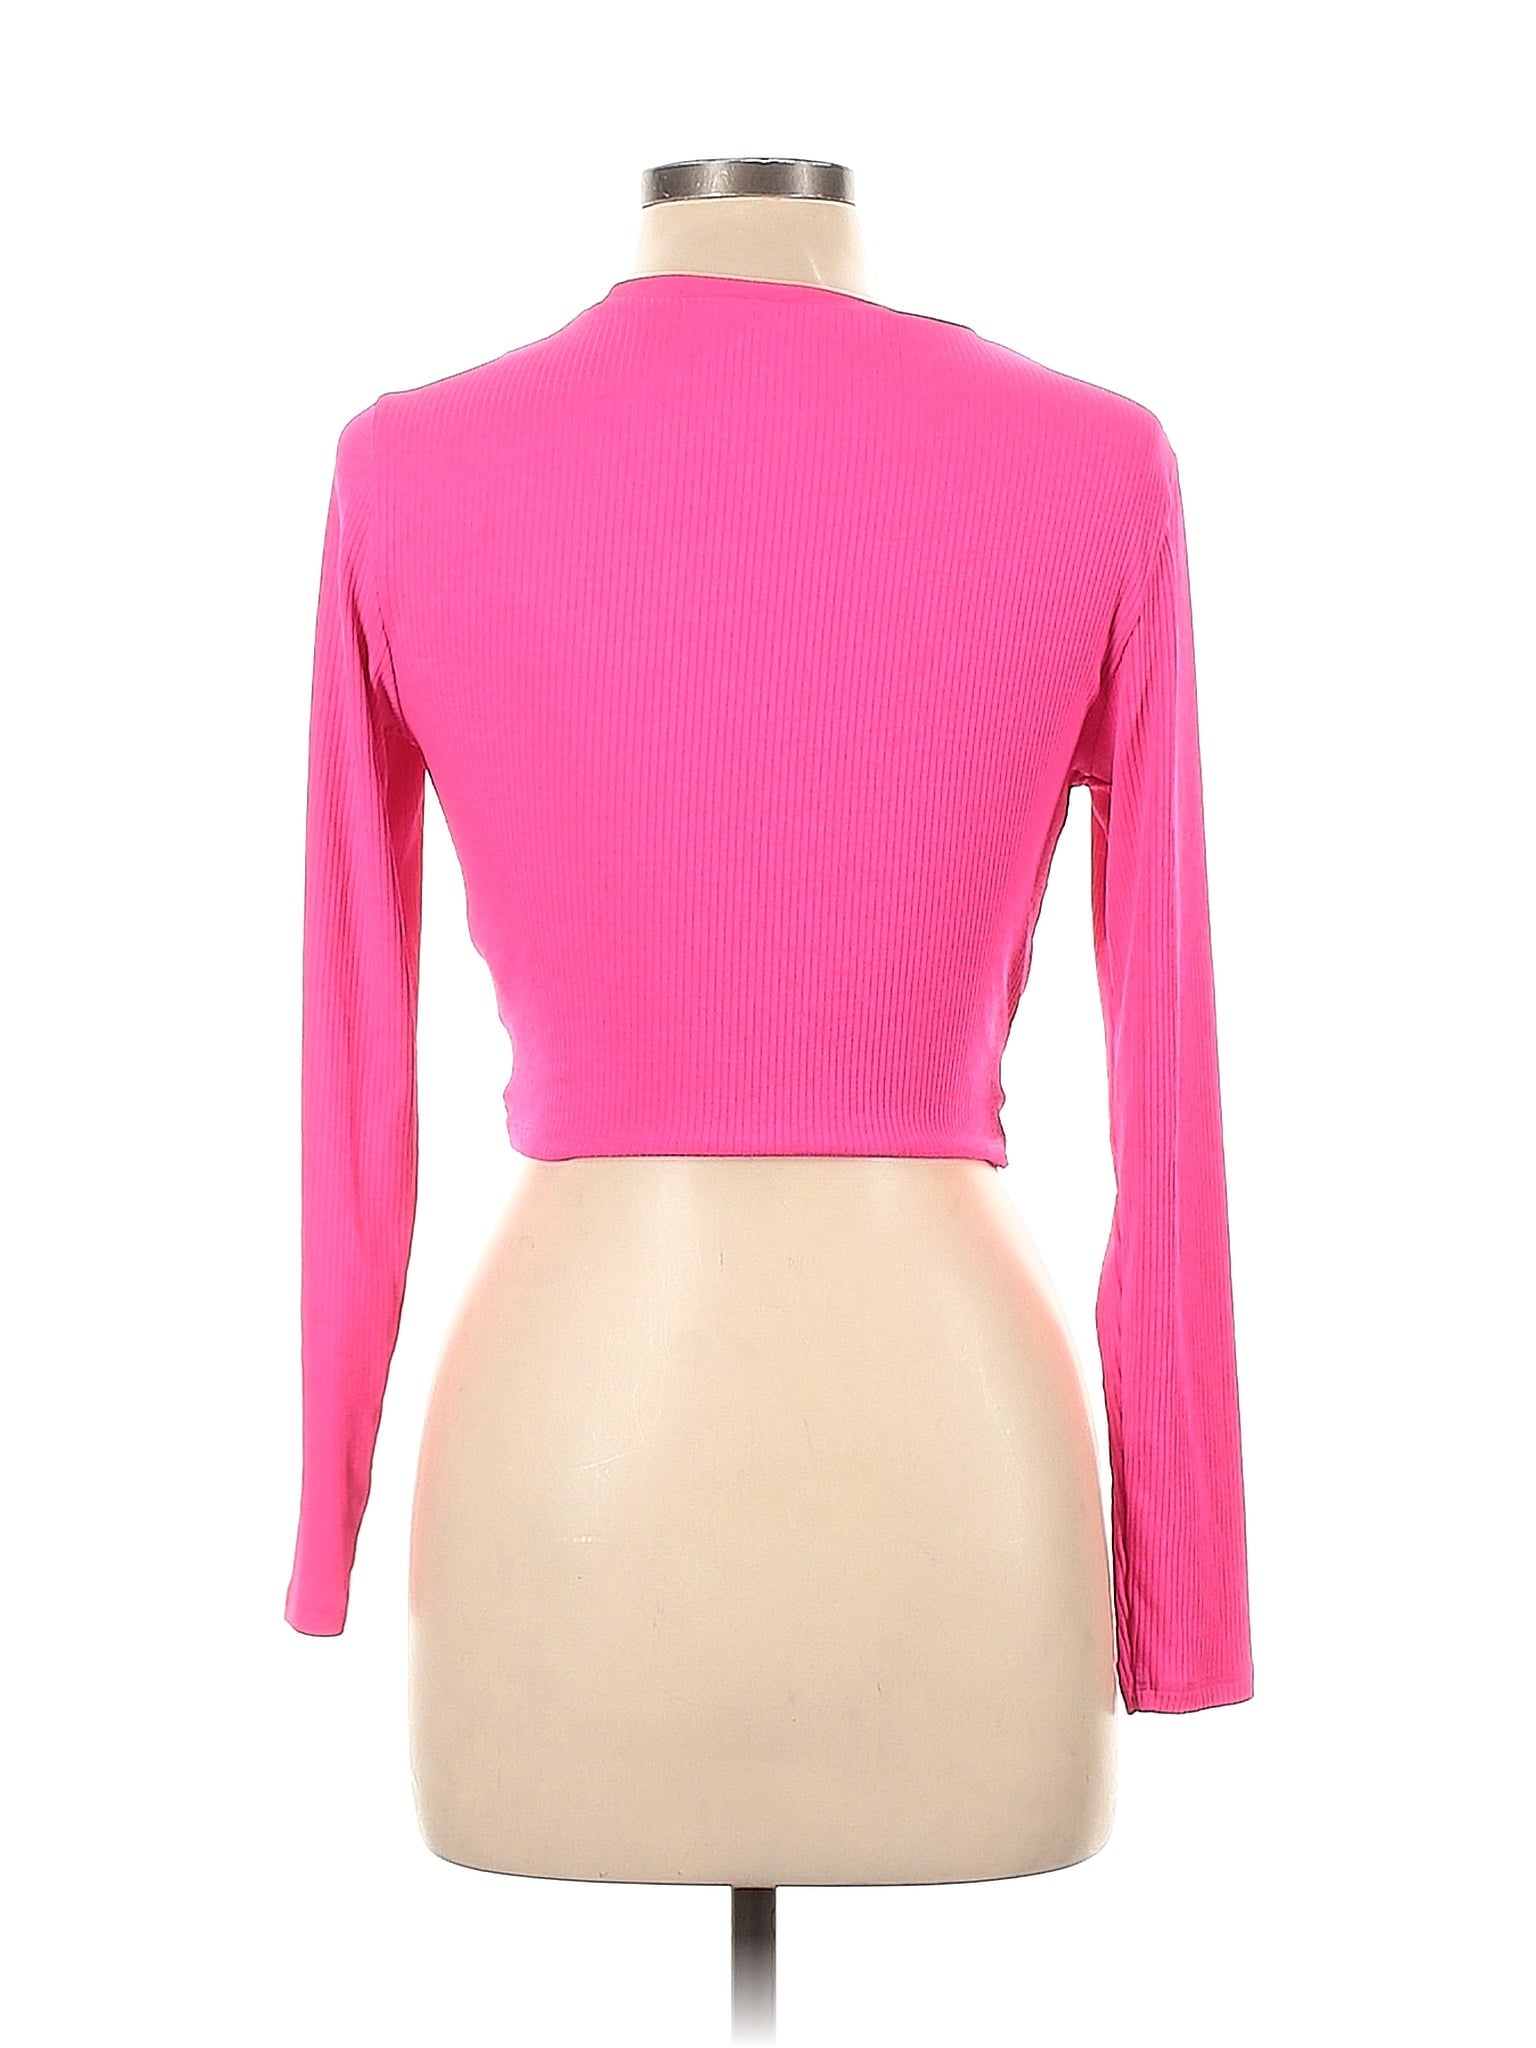 Long Sleeve Top size - L